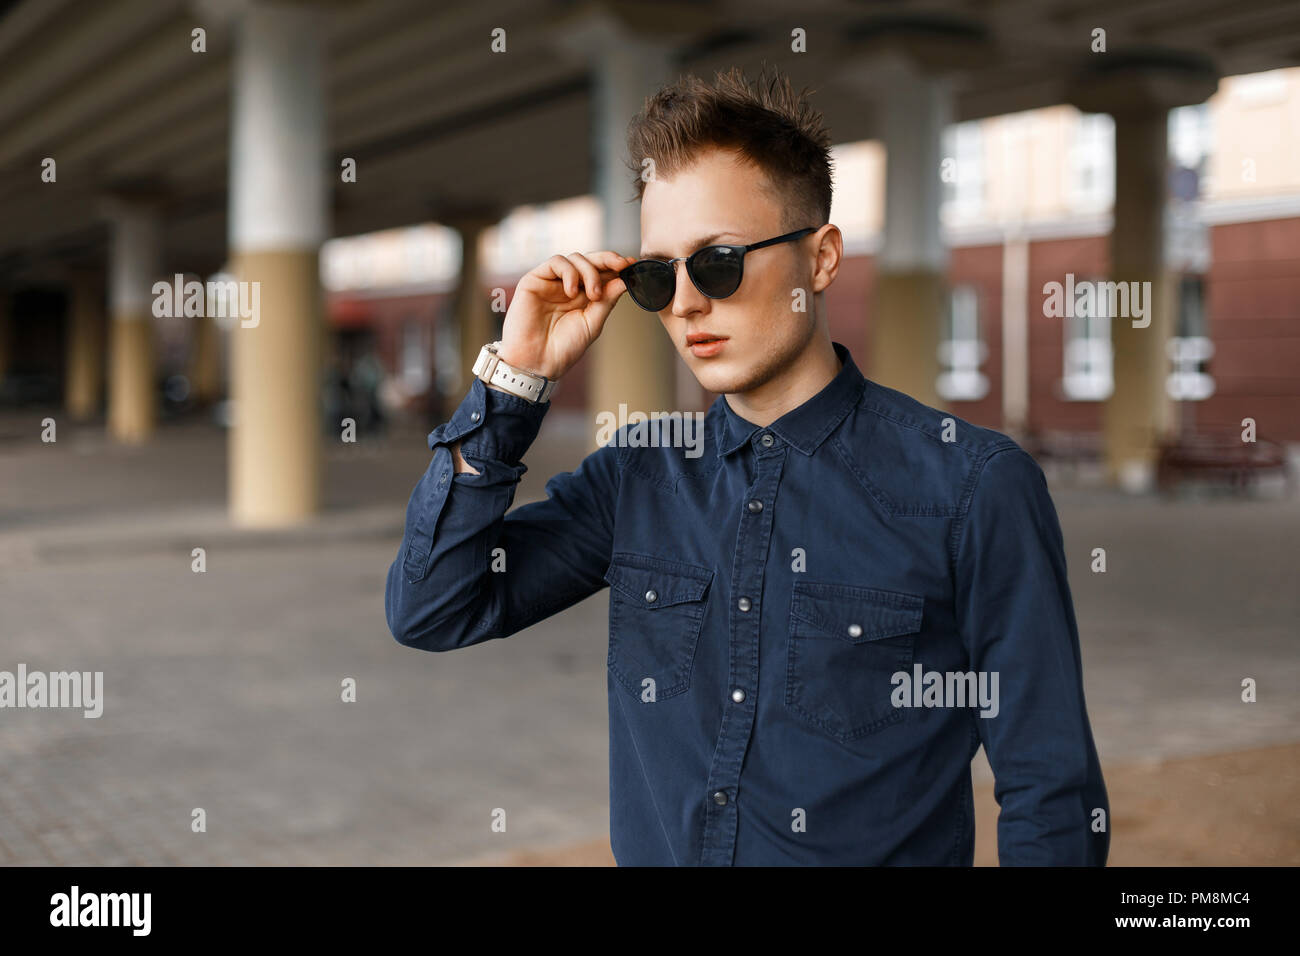 Handsome fashionable man in a blue shirt adjusts sunglasses on the street Stock Photo